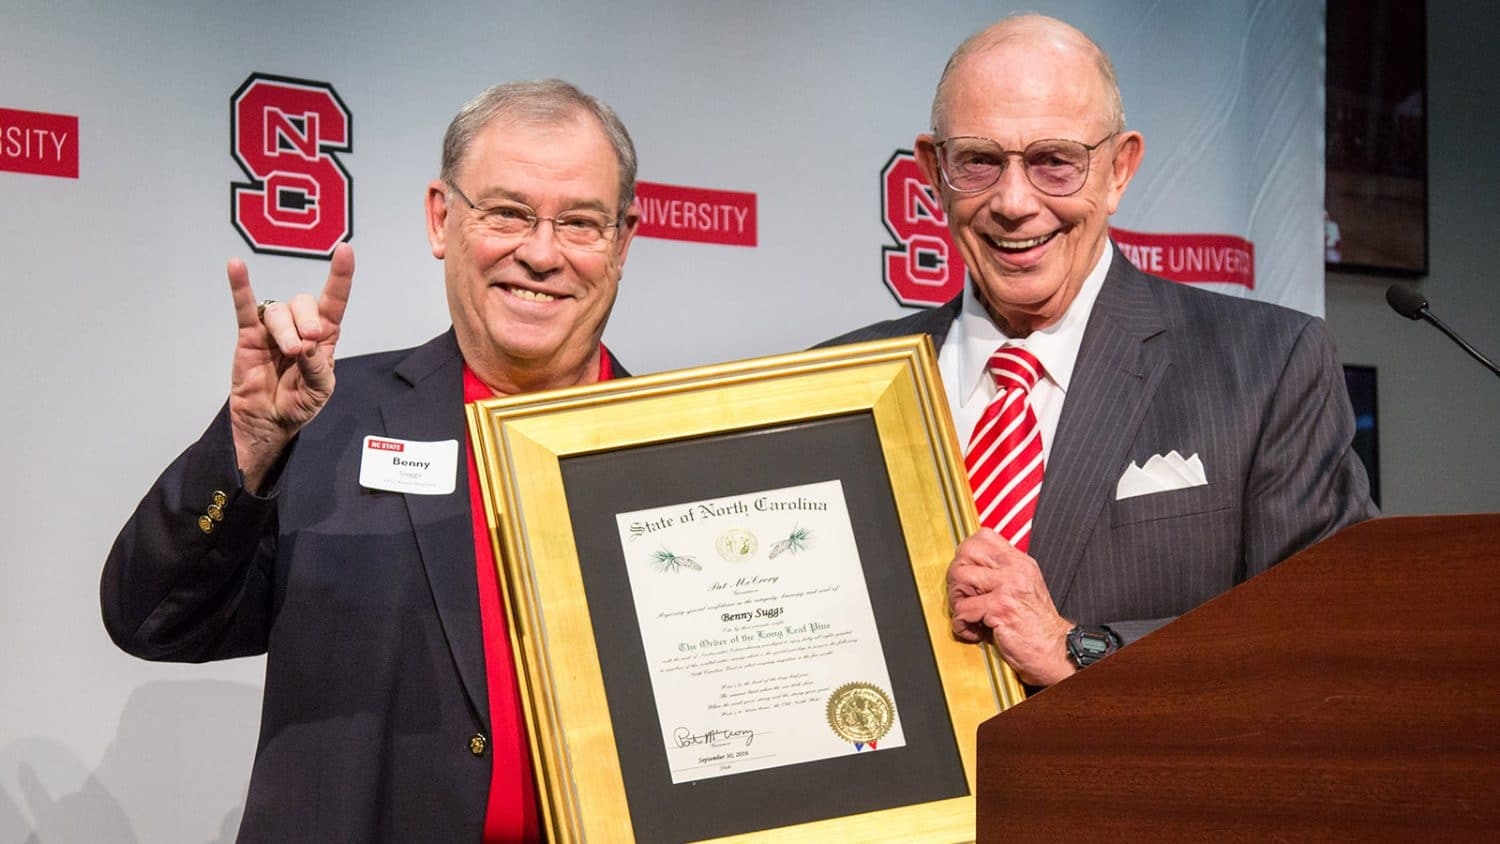 Benny Suggs receiving the Order of the Long Leaf Pine in 2017